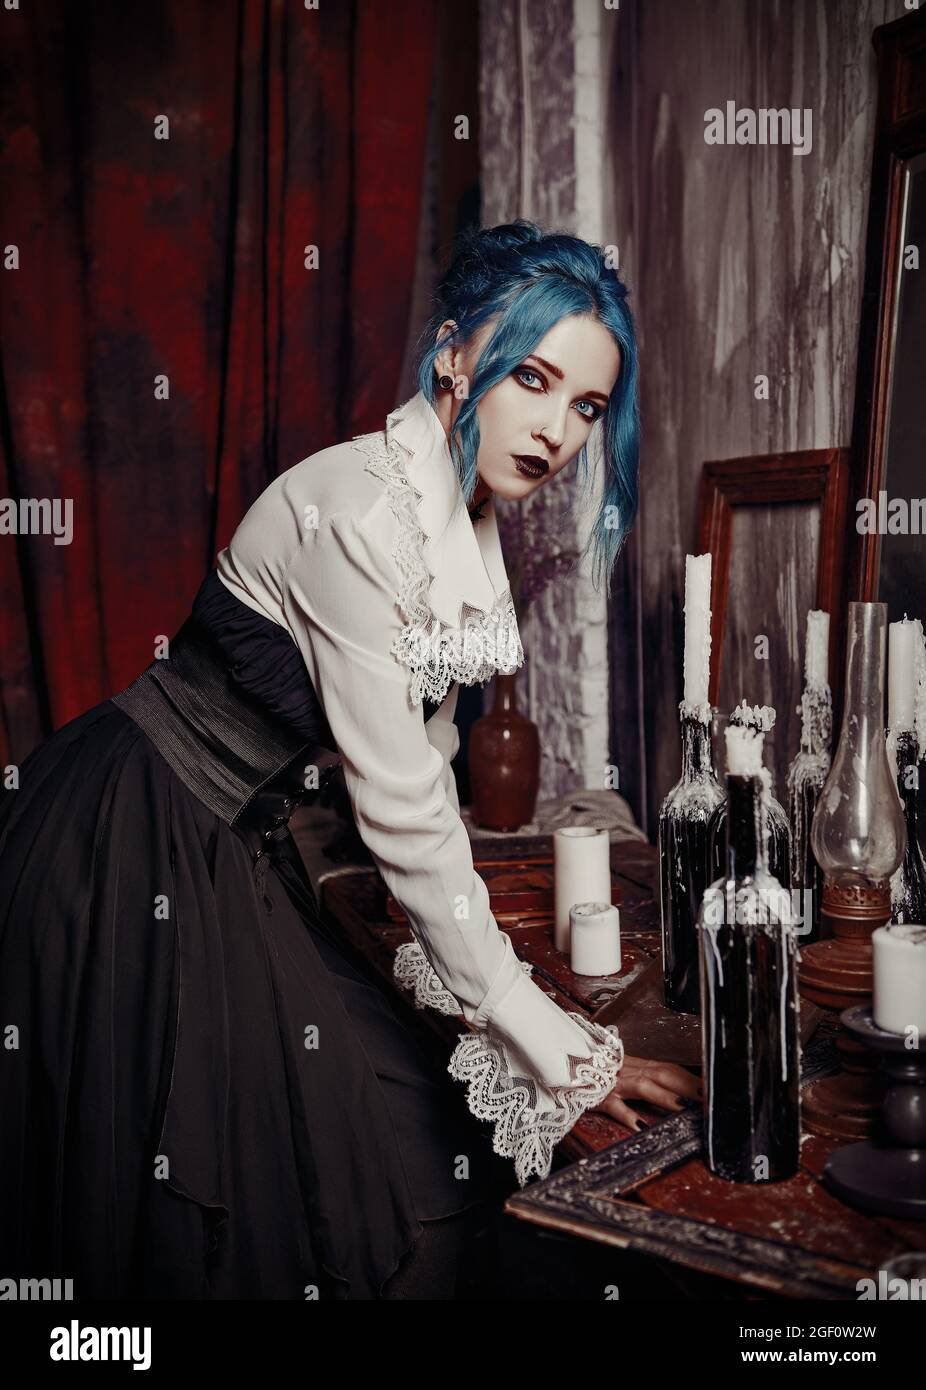 https://c8.alamy.com/comp/2GF0W2W/indoors-portrait-of-gorgeous-goth-girl-in-black-skirt-and-white-shirt-blue-haired-gothic-lady-vintage-look-2GF0W2W.jpg